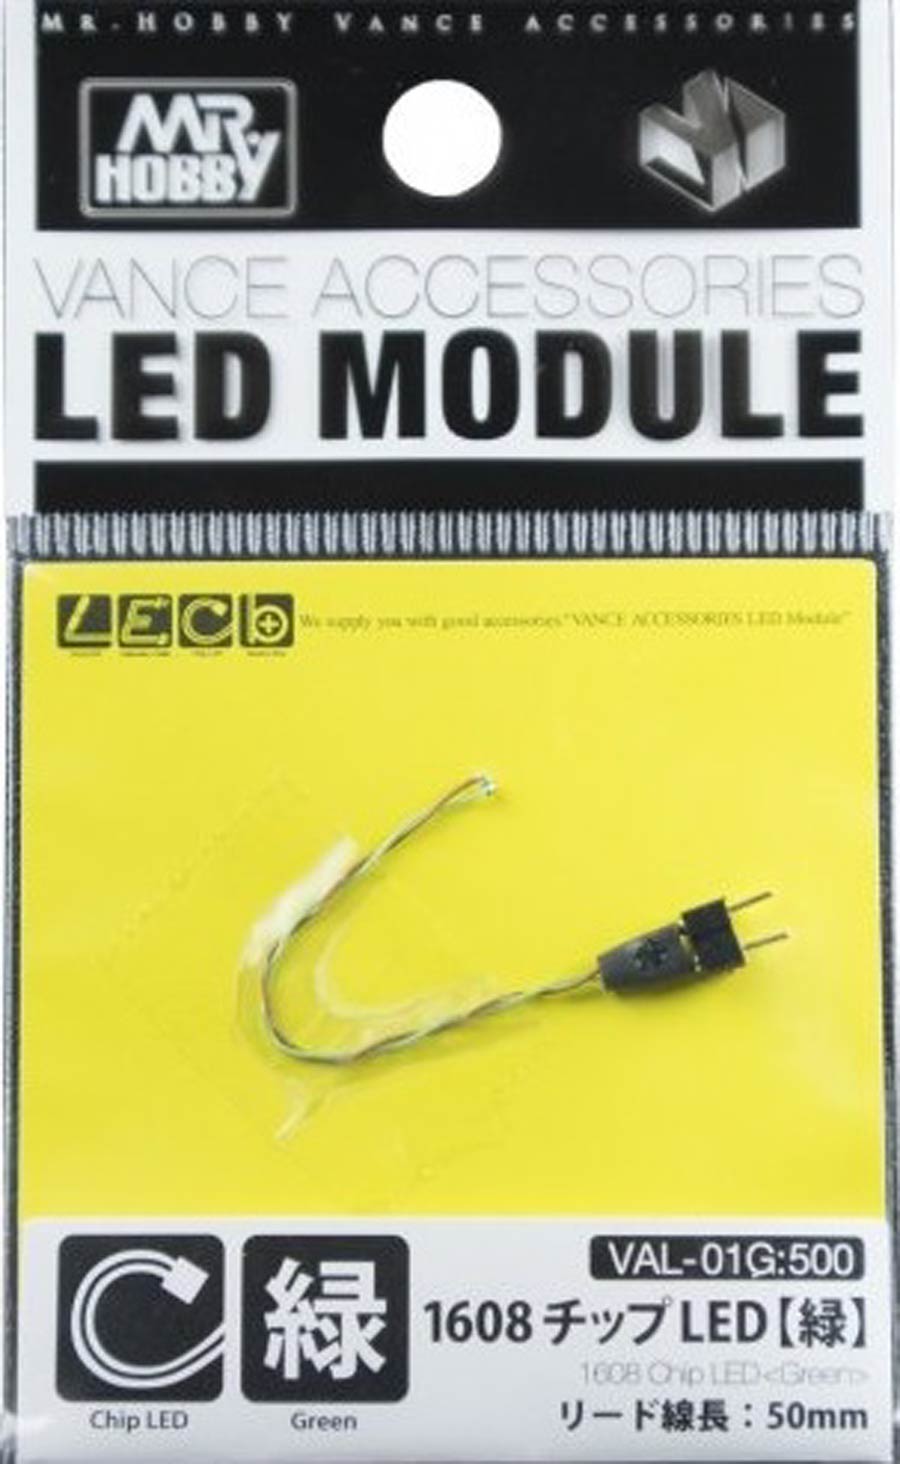 Mr. Hobby Vance Accessories LED Module -  Bag Of 10 Units - 1608 Chip LED (Green)